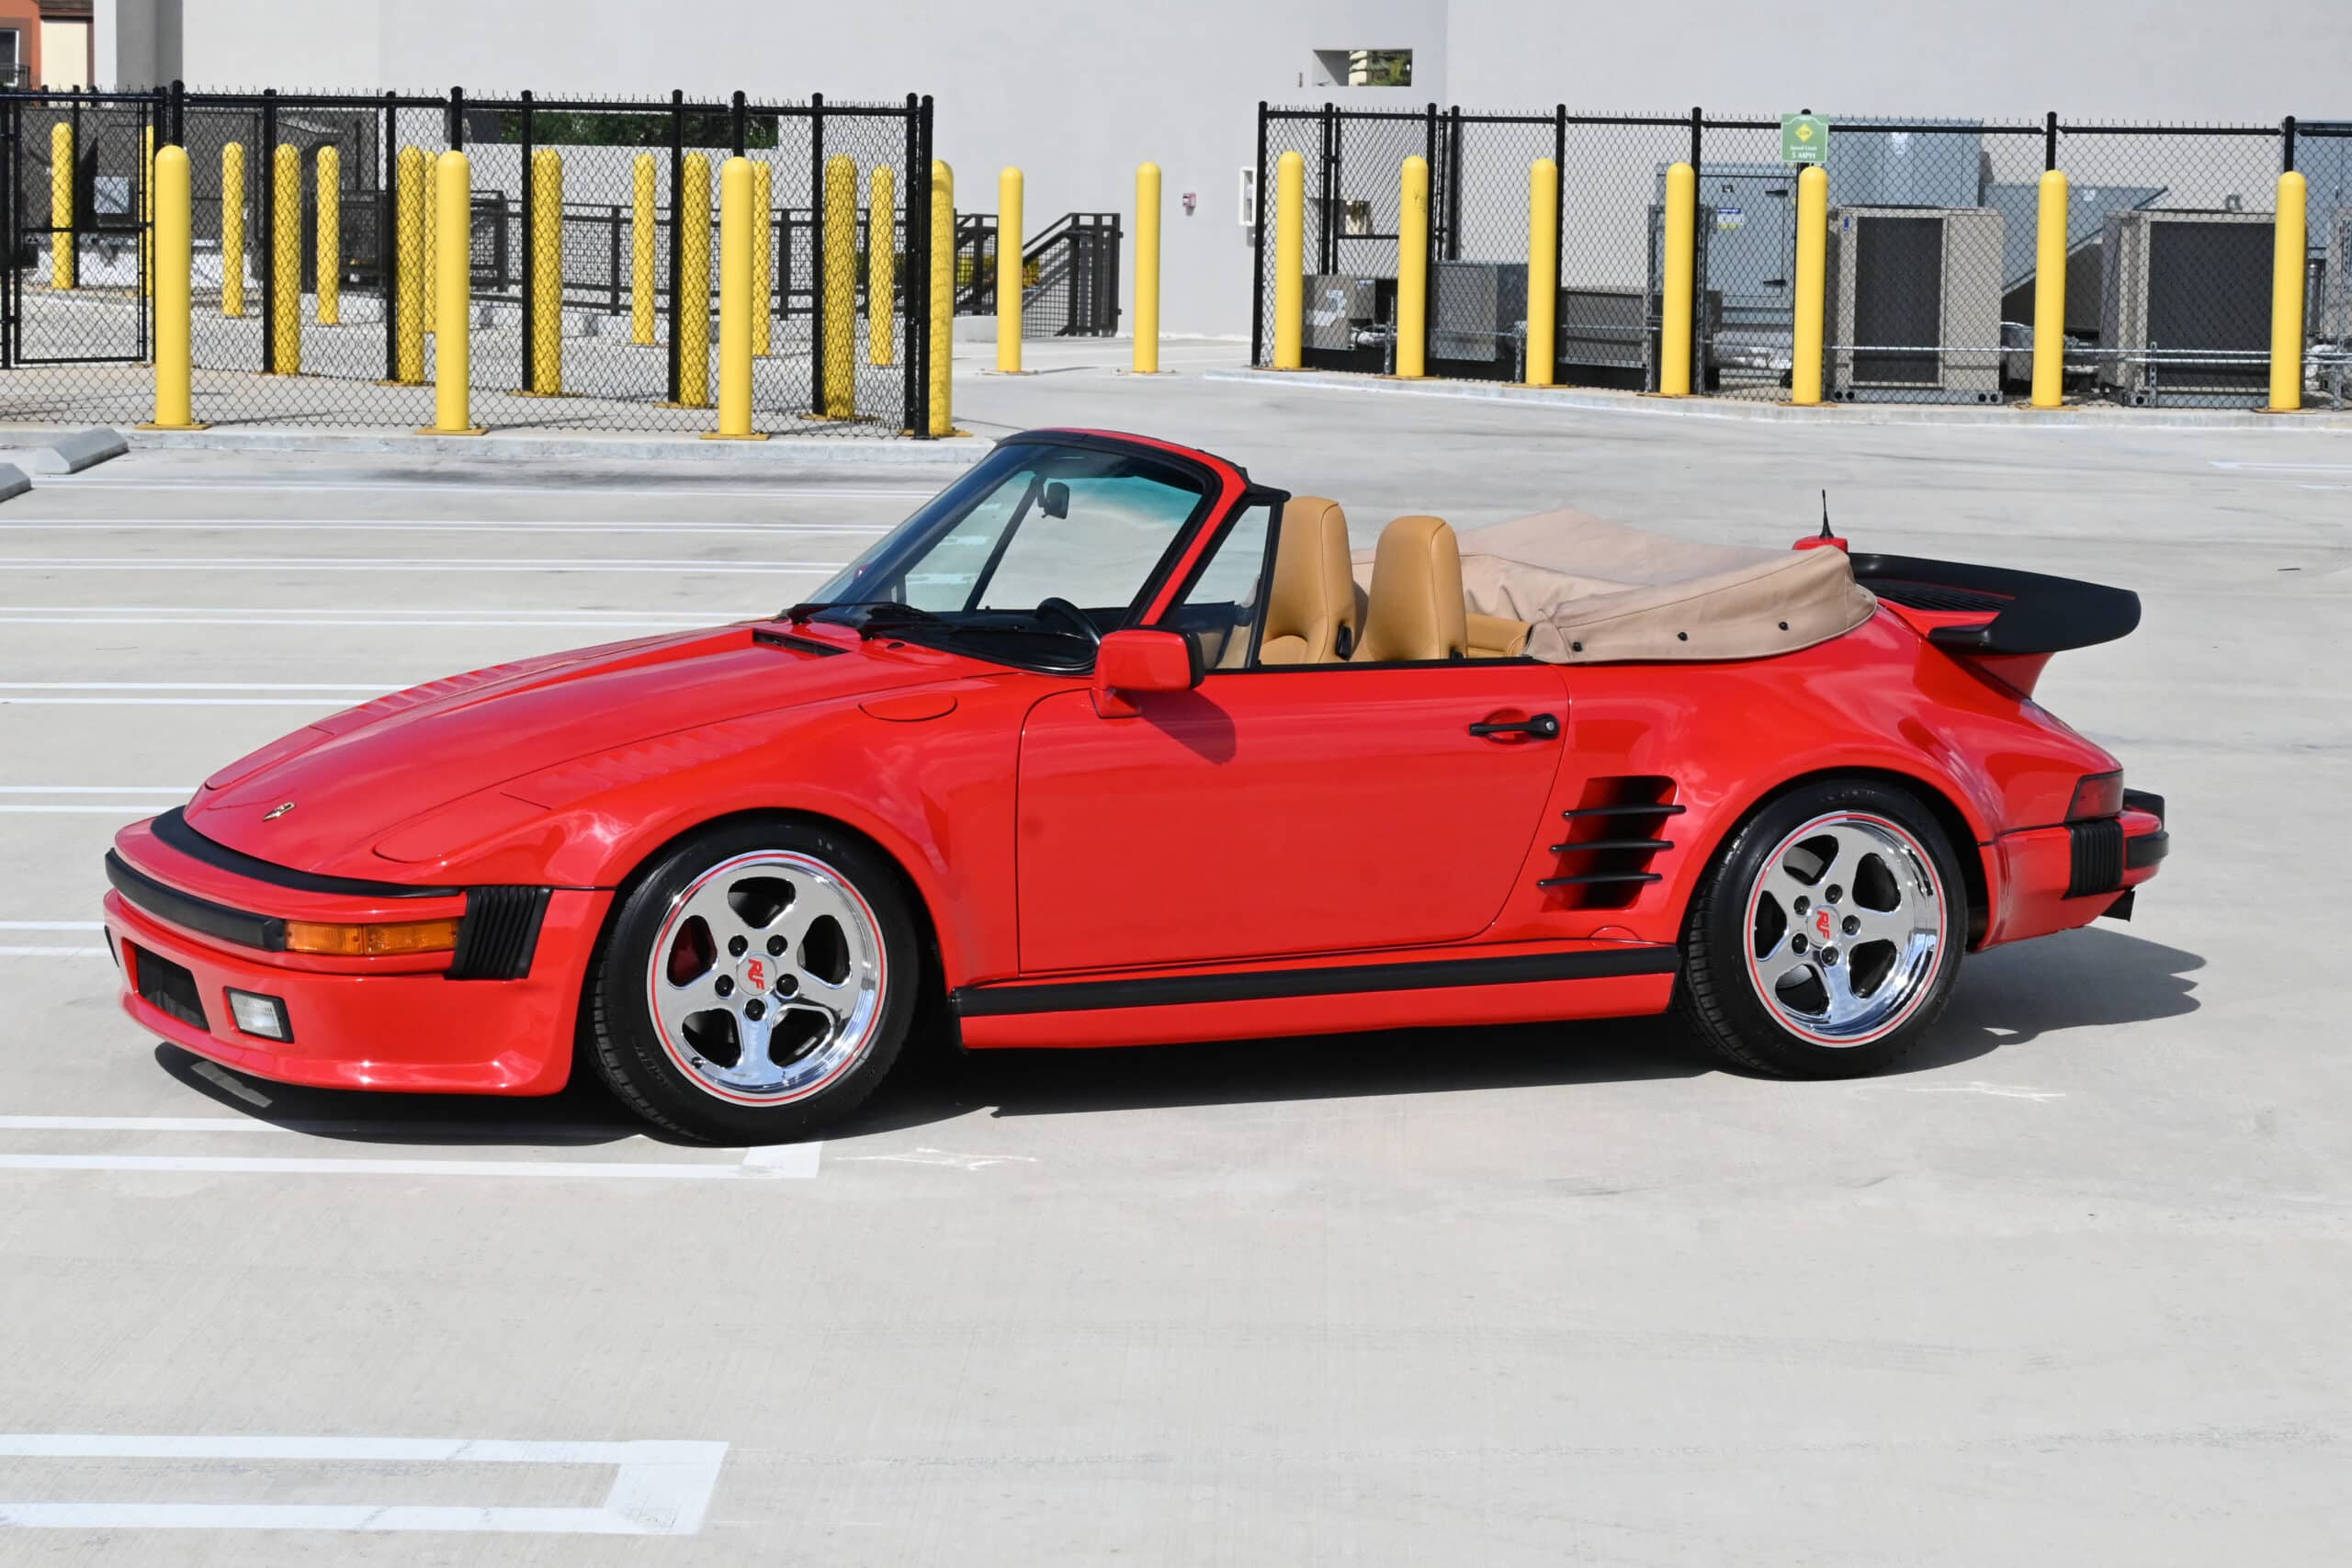 1989 Carrera Slant Nose / 11K Actual and Documented Miles / Indy Car Driver owned / Meticulously maintained with Records / Steel Slant Nose / Ruf Speedline Wheels / Museum quality / Window Sticker / Original Bill of Sale